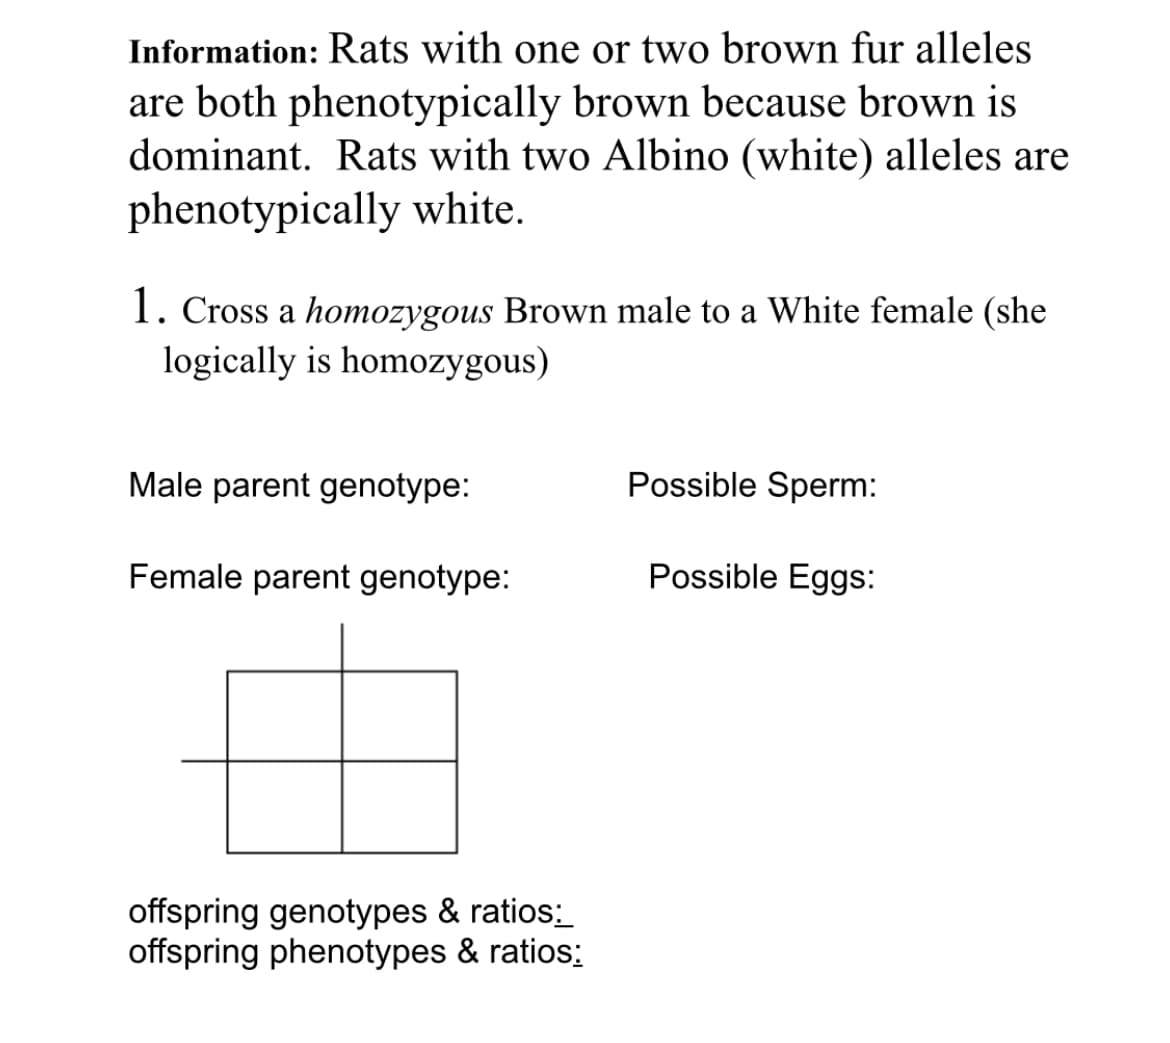 Information: Rats with one or two brown fur alleles
are both phenotypically brown because brown is
dominant. Rats with two Albino (white) alleles are
phenotypically white.
1. Cross a homozygous Brown male to a White female (she
logically is homozygous)
Male parent genotype:
Possible Sperm:
Female parent genotype:
Possible Eggs:
offspring genotypes & ratios:
offspring phenotypes & ratios:
